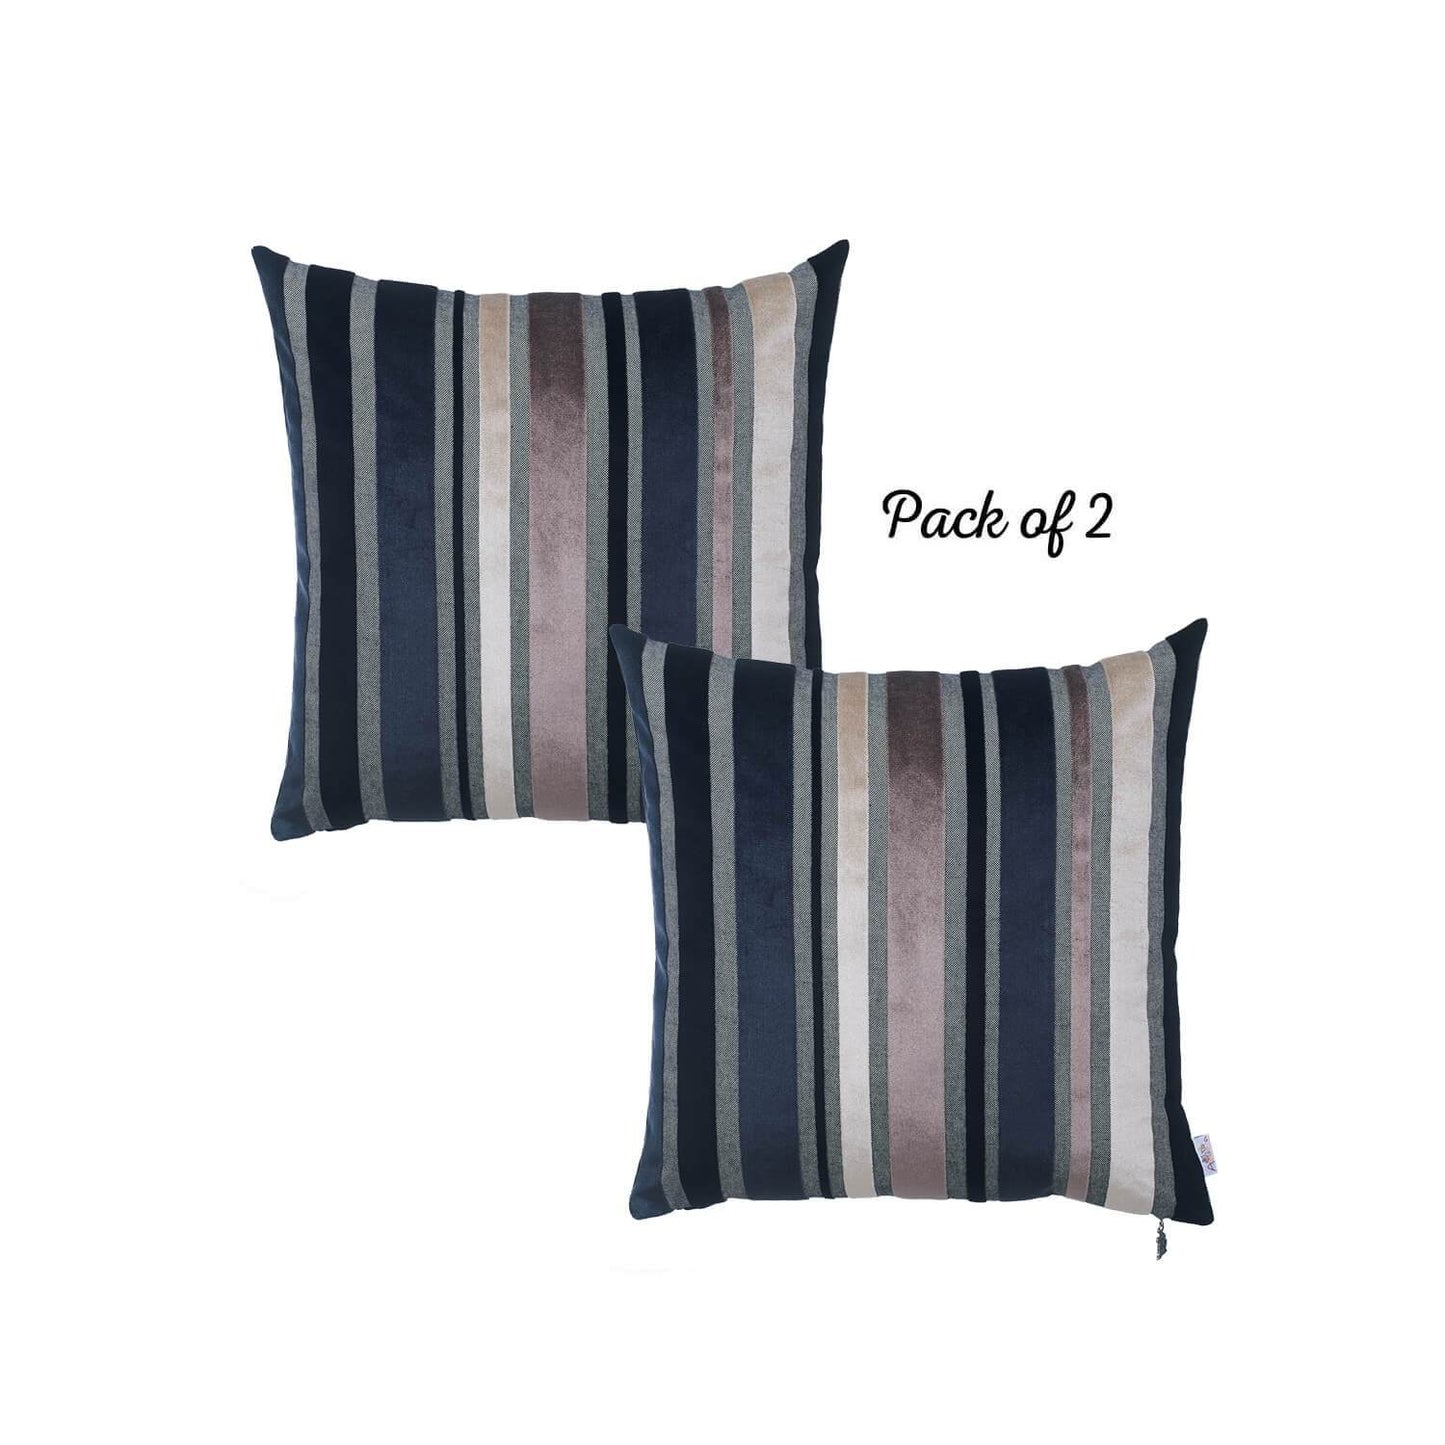 Set of 2 Midnight Variegated Stripe Decorative Pillow Covers